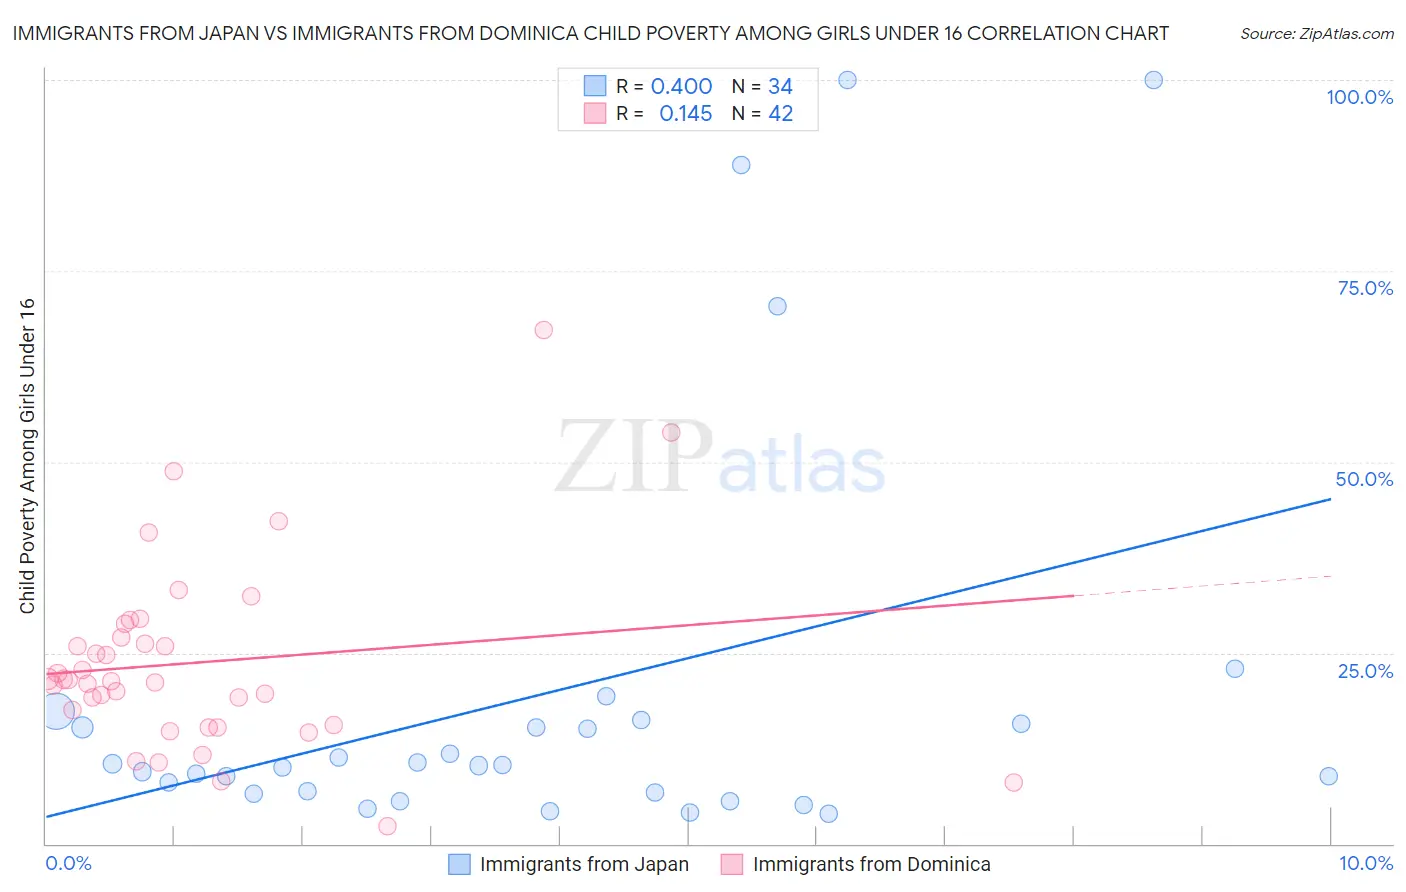 Immigrants from Japan vs Immigrants from Dominica Child Poverty Among Girls Under 16